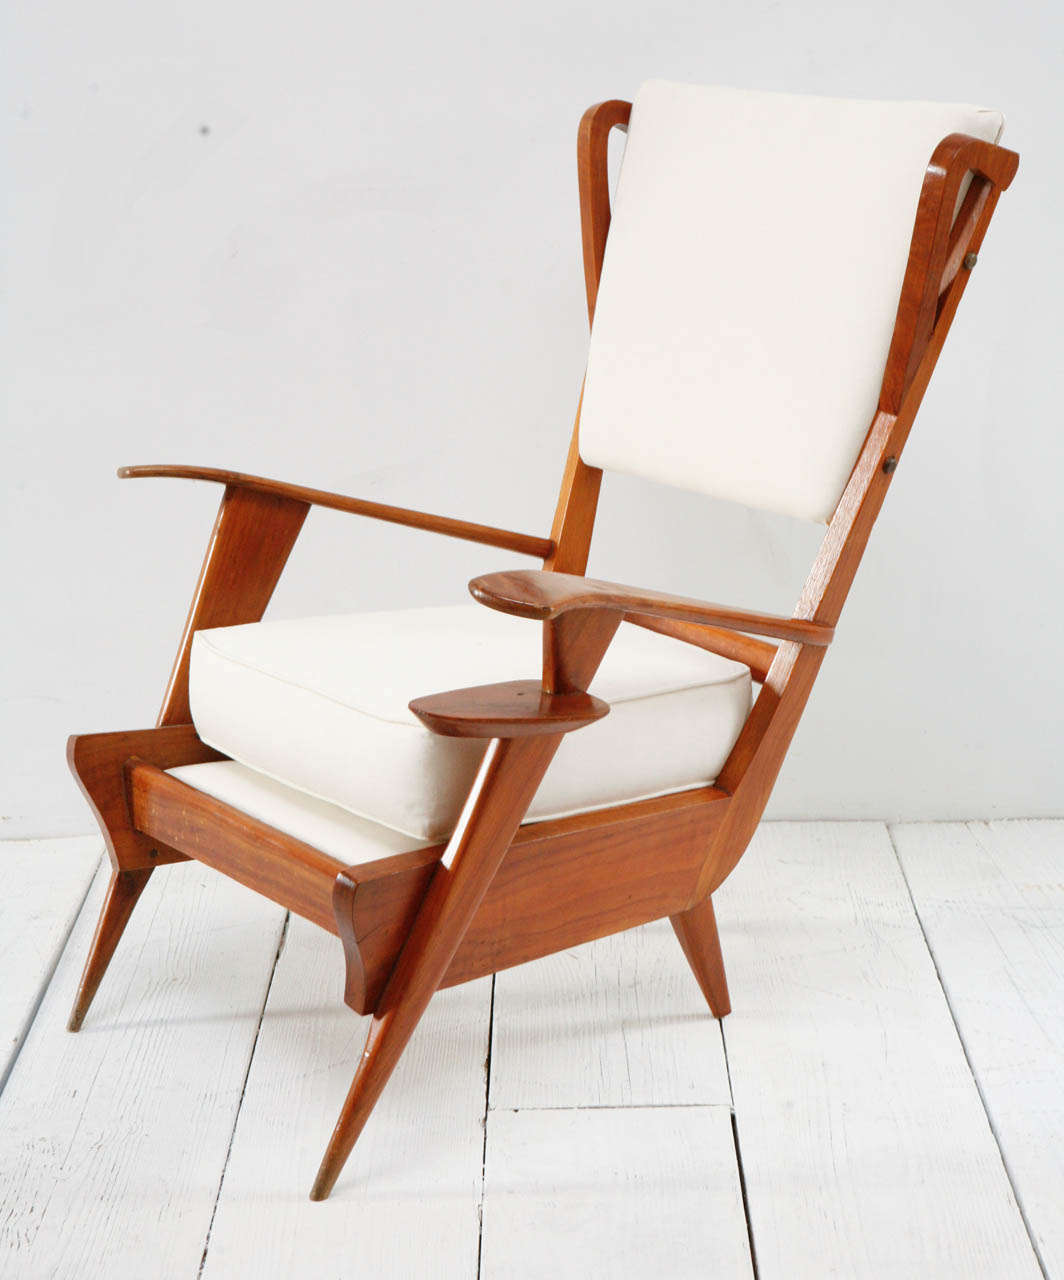 Mid-20th Century Pair of Italian Teak Viewing Chairs with Cup Holder